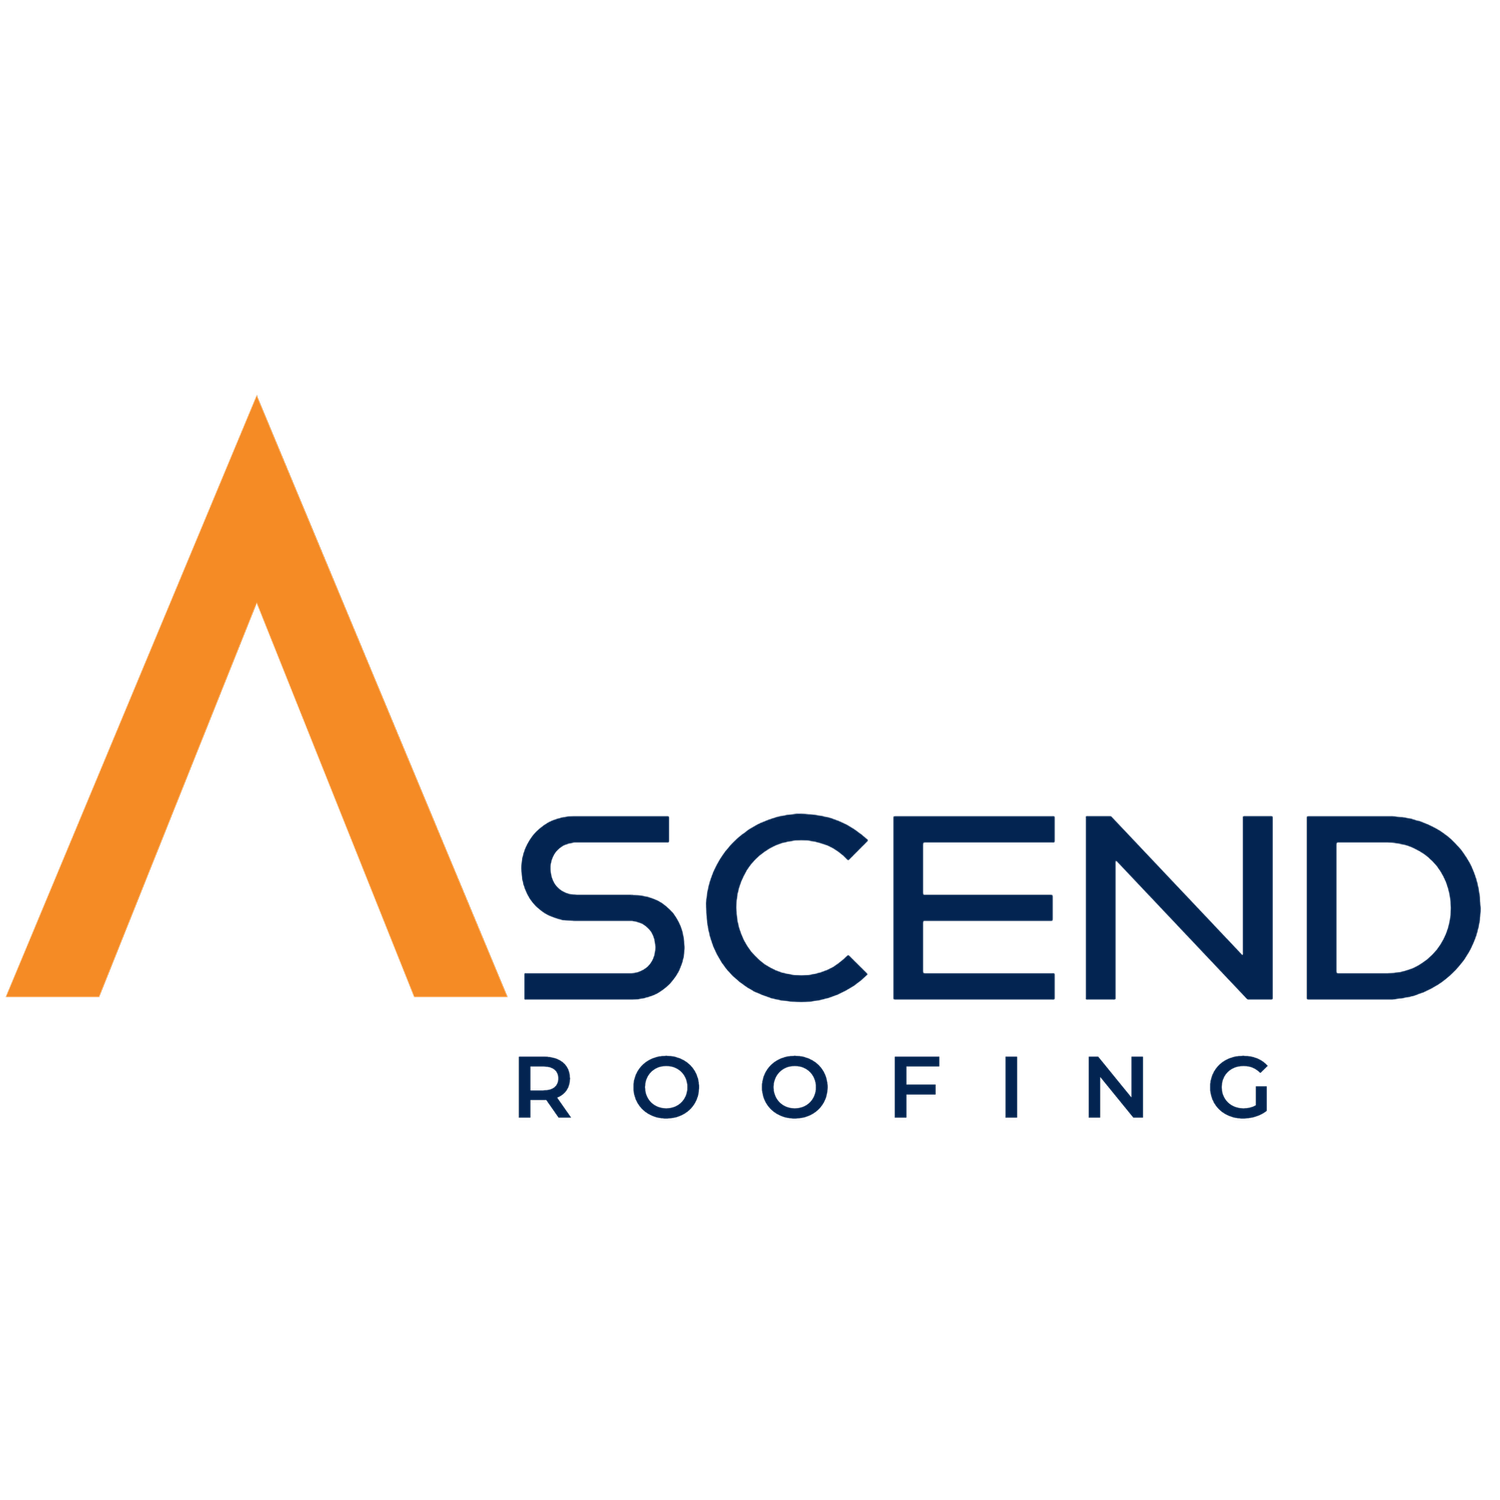 ASCEND ROOFING 